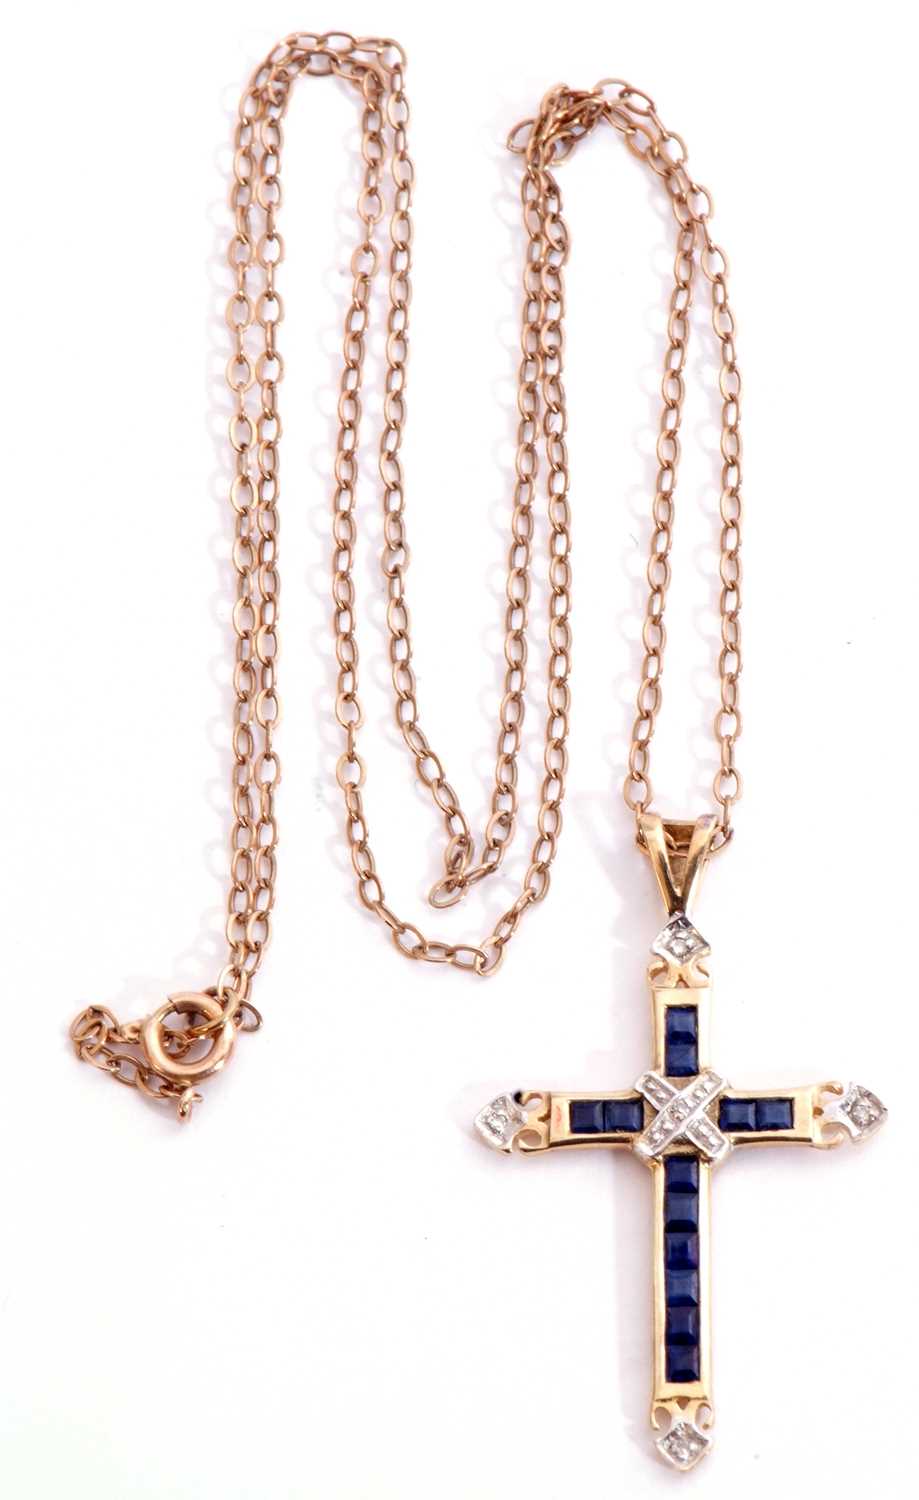 9ct gold sapphire and diamond cross pendant, 3.5 x 2cm, the cross set with calibre cut pave